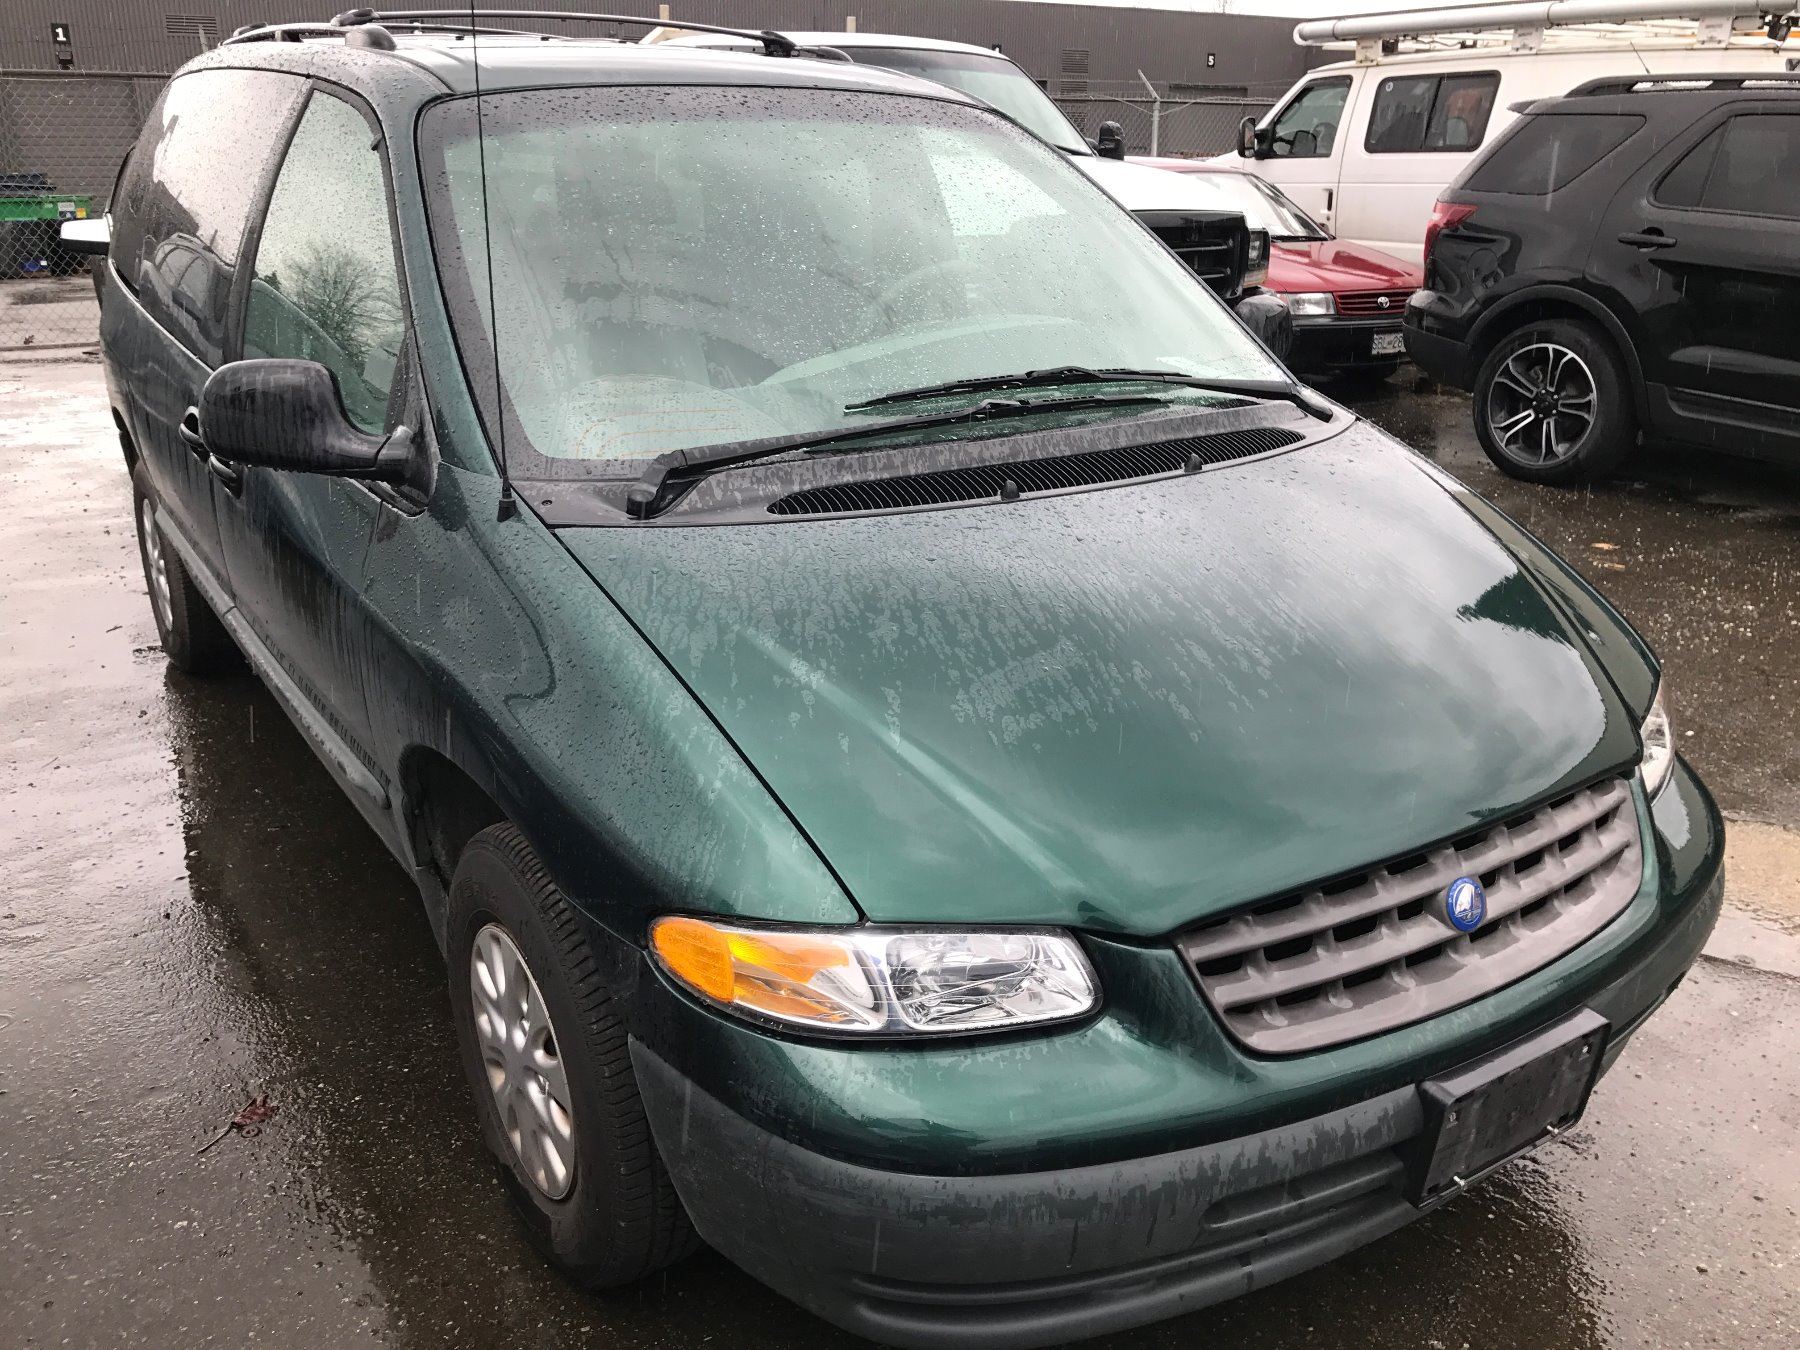 1998 PLYMOUTH VOYAGER, 4 DOOR PASS VAN, GREEN, VIN # 2P4FP2535WR504008 -  Able Auctions